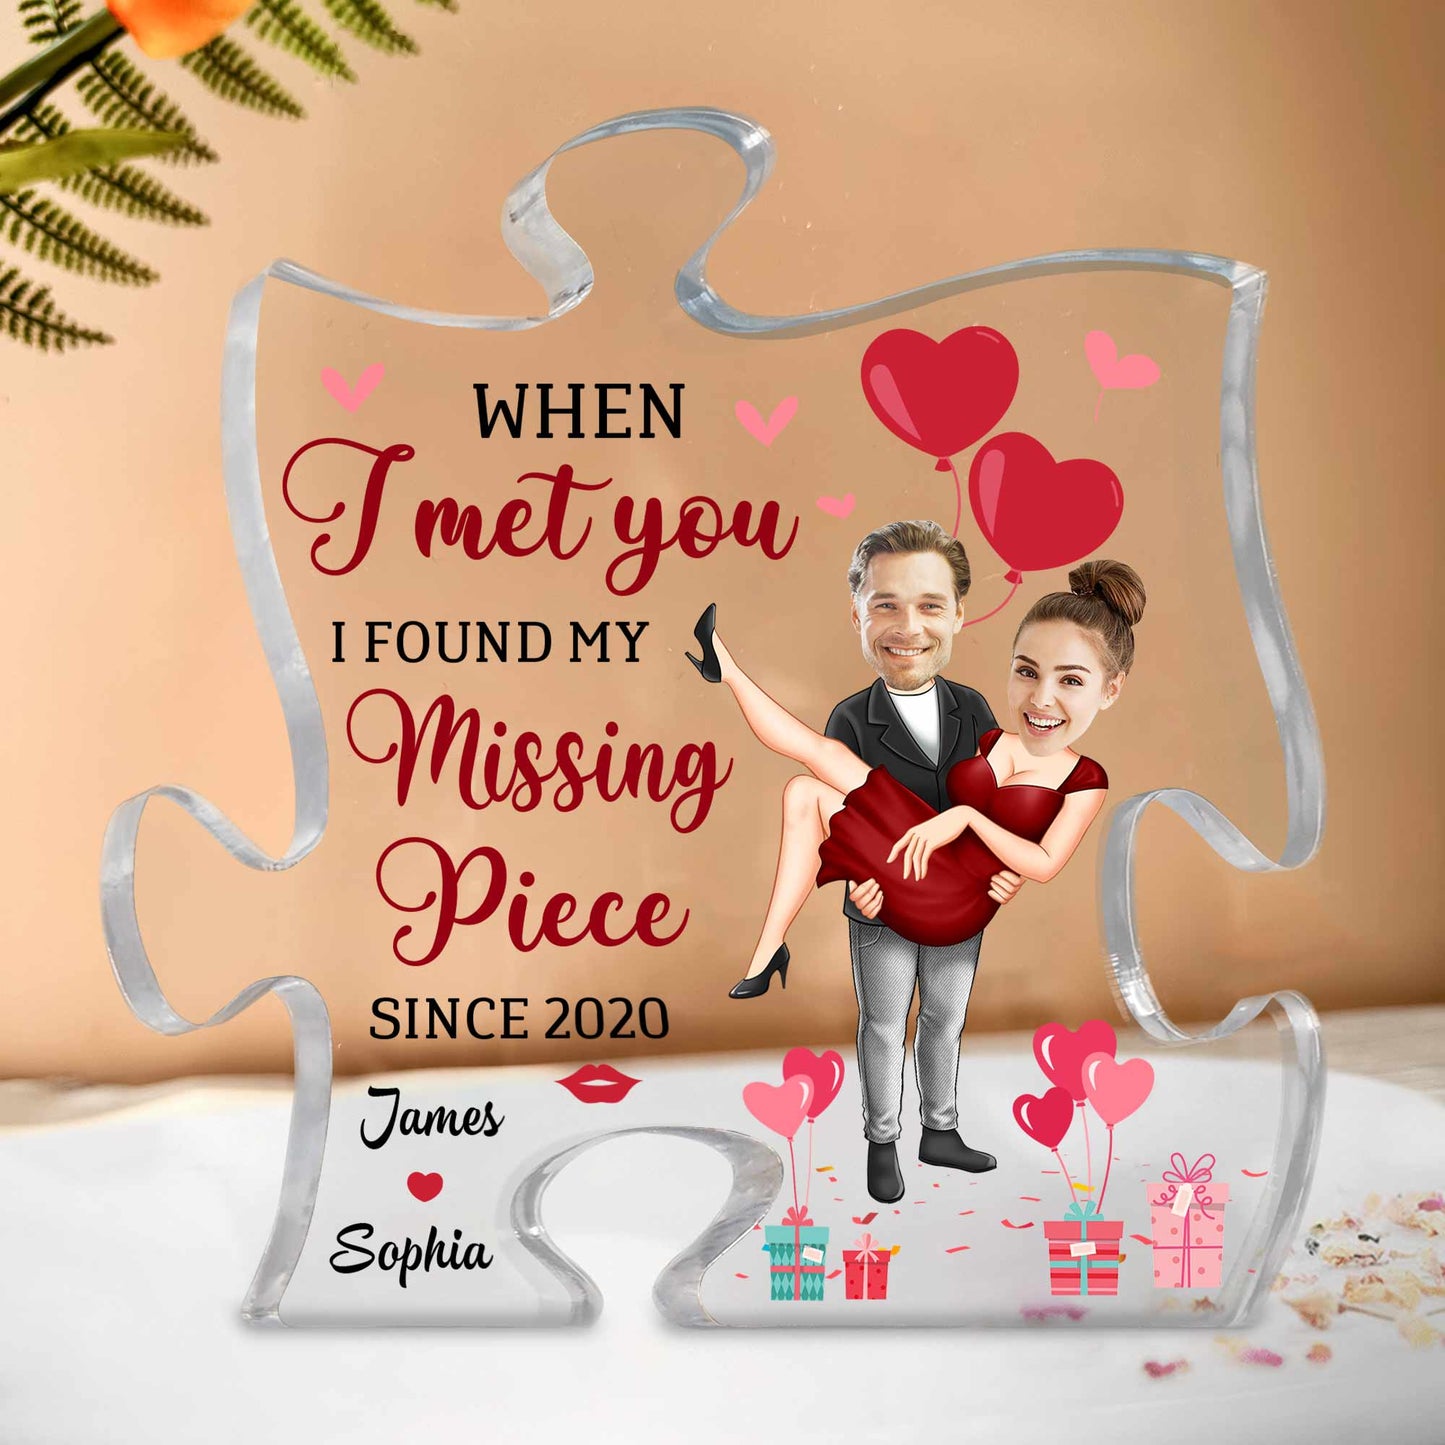 When I Met You I Found My Missing Piece - Personalized Acrylic Photo Plaque